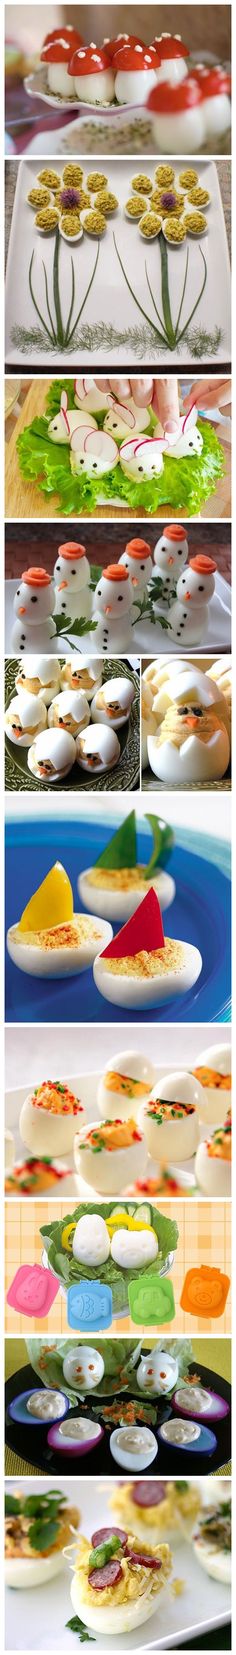 fun & easy to make <a class="pintag" href="/explore/creative" title="#creative explore Pinterest">#creative</a> <a class="pintag searchlink" data-query="%23egg" data-type="hashtag" href="/search/?q=%23egg&rs=hashtag" rel="nofollow" title="#egg search Pinterest">#egg</a> <a class="pintag" href="/explore/food" title="#food explore Pinterest">#food</a>